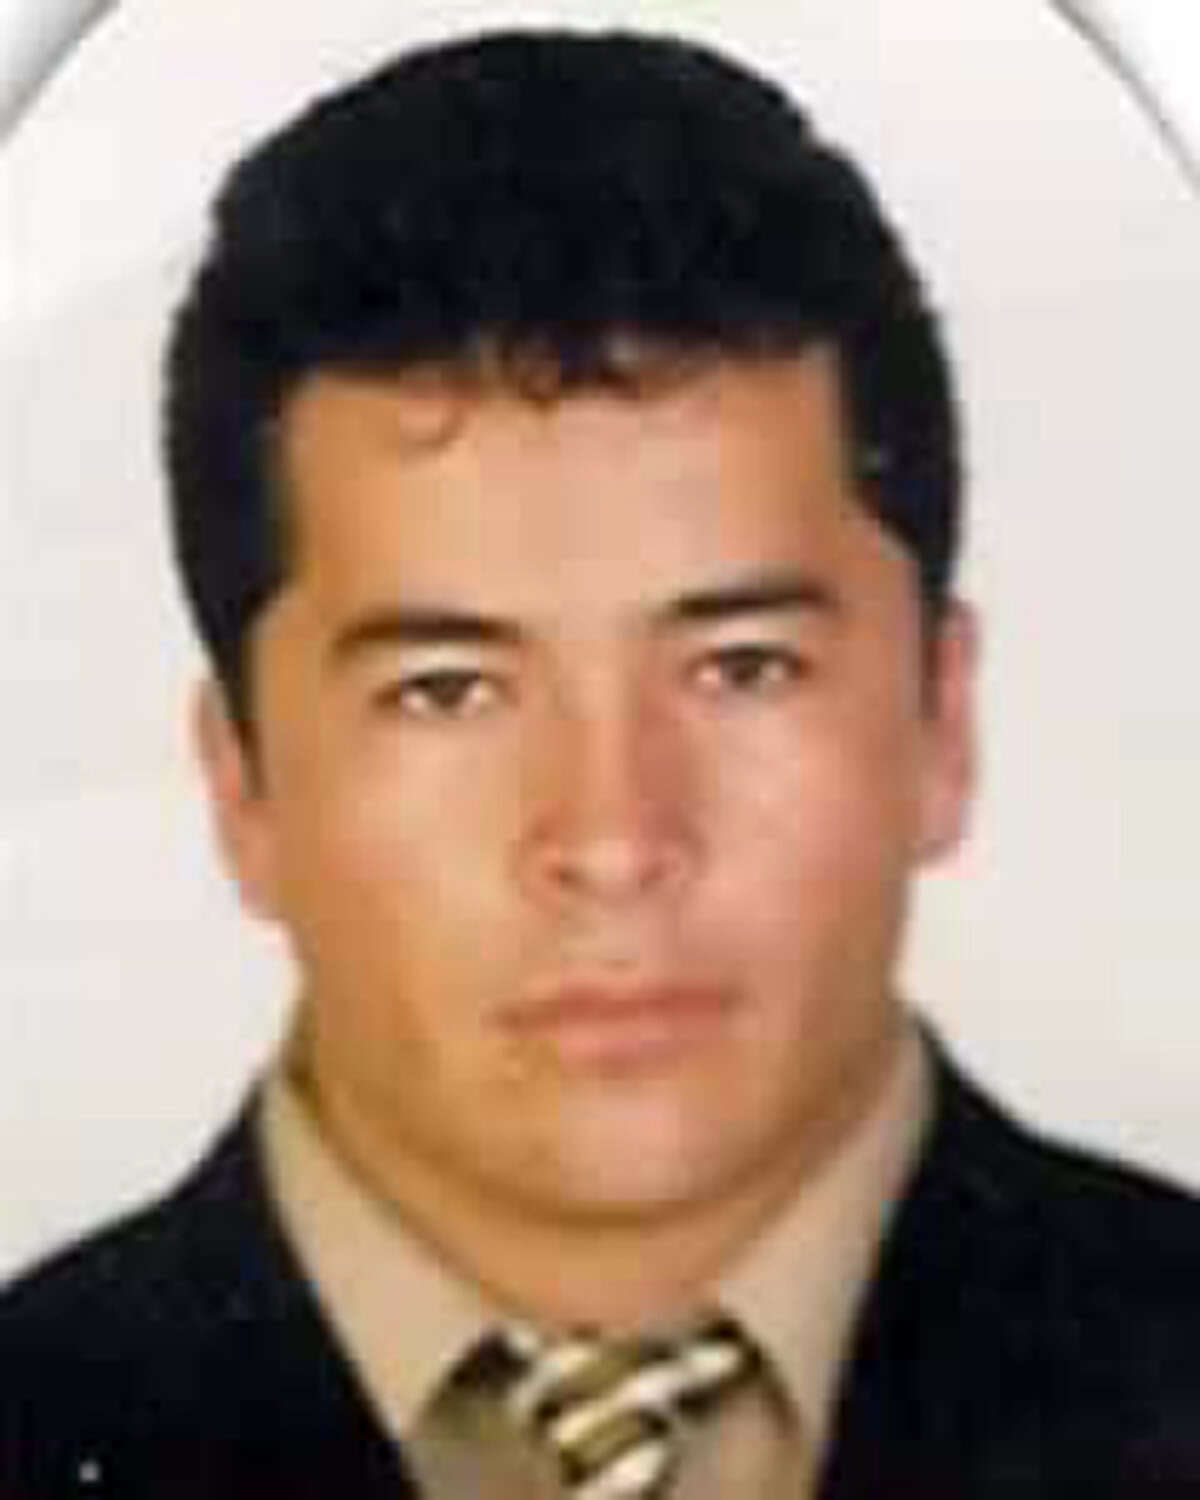 FILE - This undated file photo, downloaded from the Mexico's Attorney General's Office most wanted criminals webpage on Nov. 2, 2010, shows alleged Zeta drug cartel leader and founder Heriberto Lazcano Lazcano in an undisclosed location. The Mexican navy says on Monday, Oct. 8, 2012, Lazcano has apparently been killed in a firefight with marines in the Mexican northern border state of Coahuila. (AP Photo/Mexico's Attorney General's Office, file)